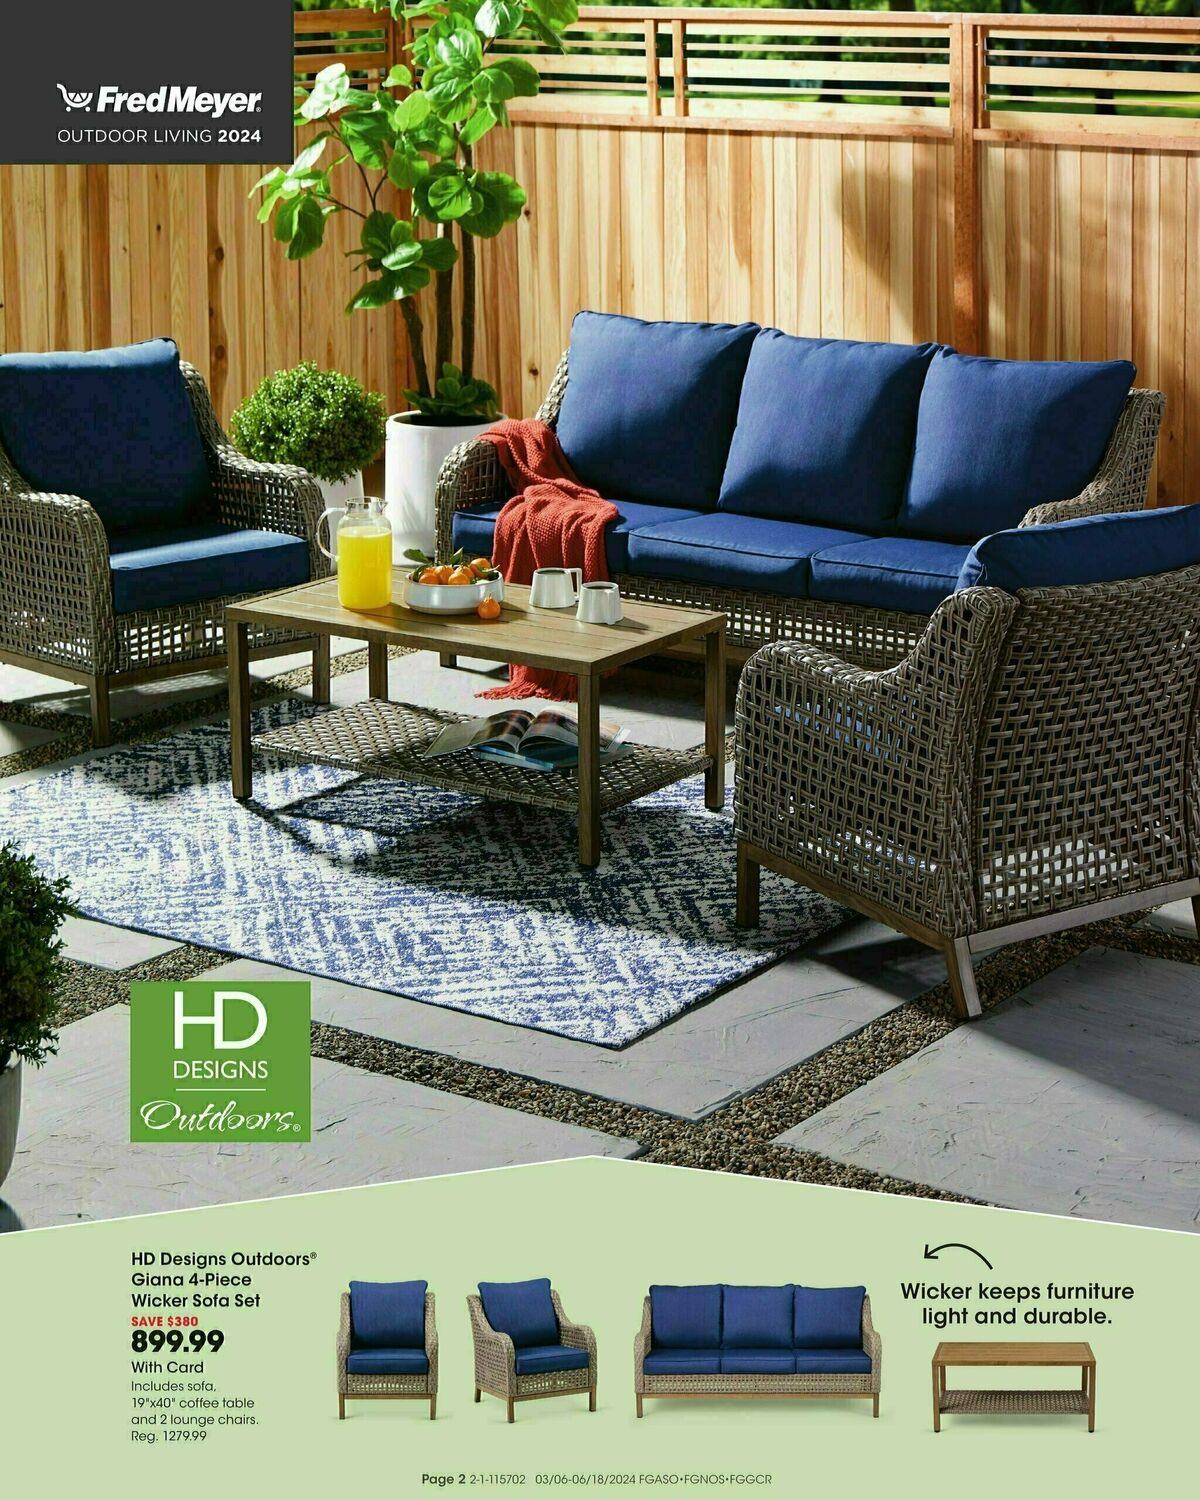 Fred Meyer Outdoor Living Look book Weekly Ad from March 6